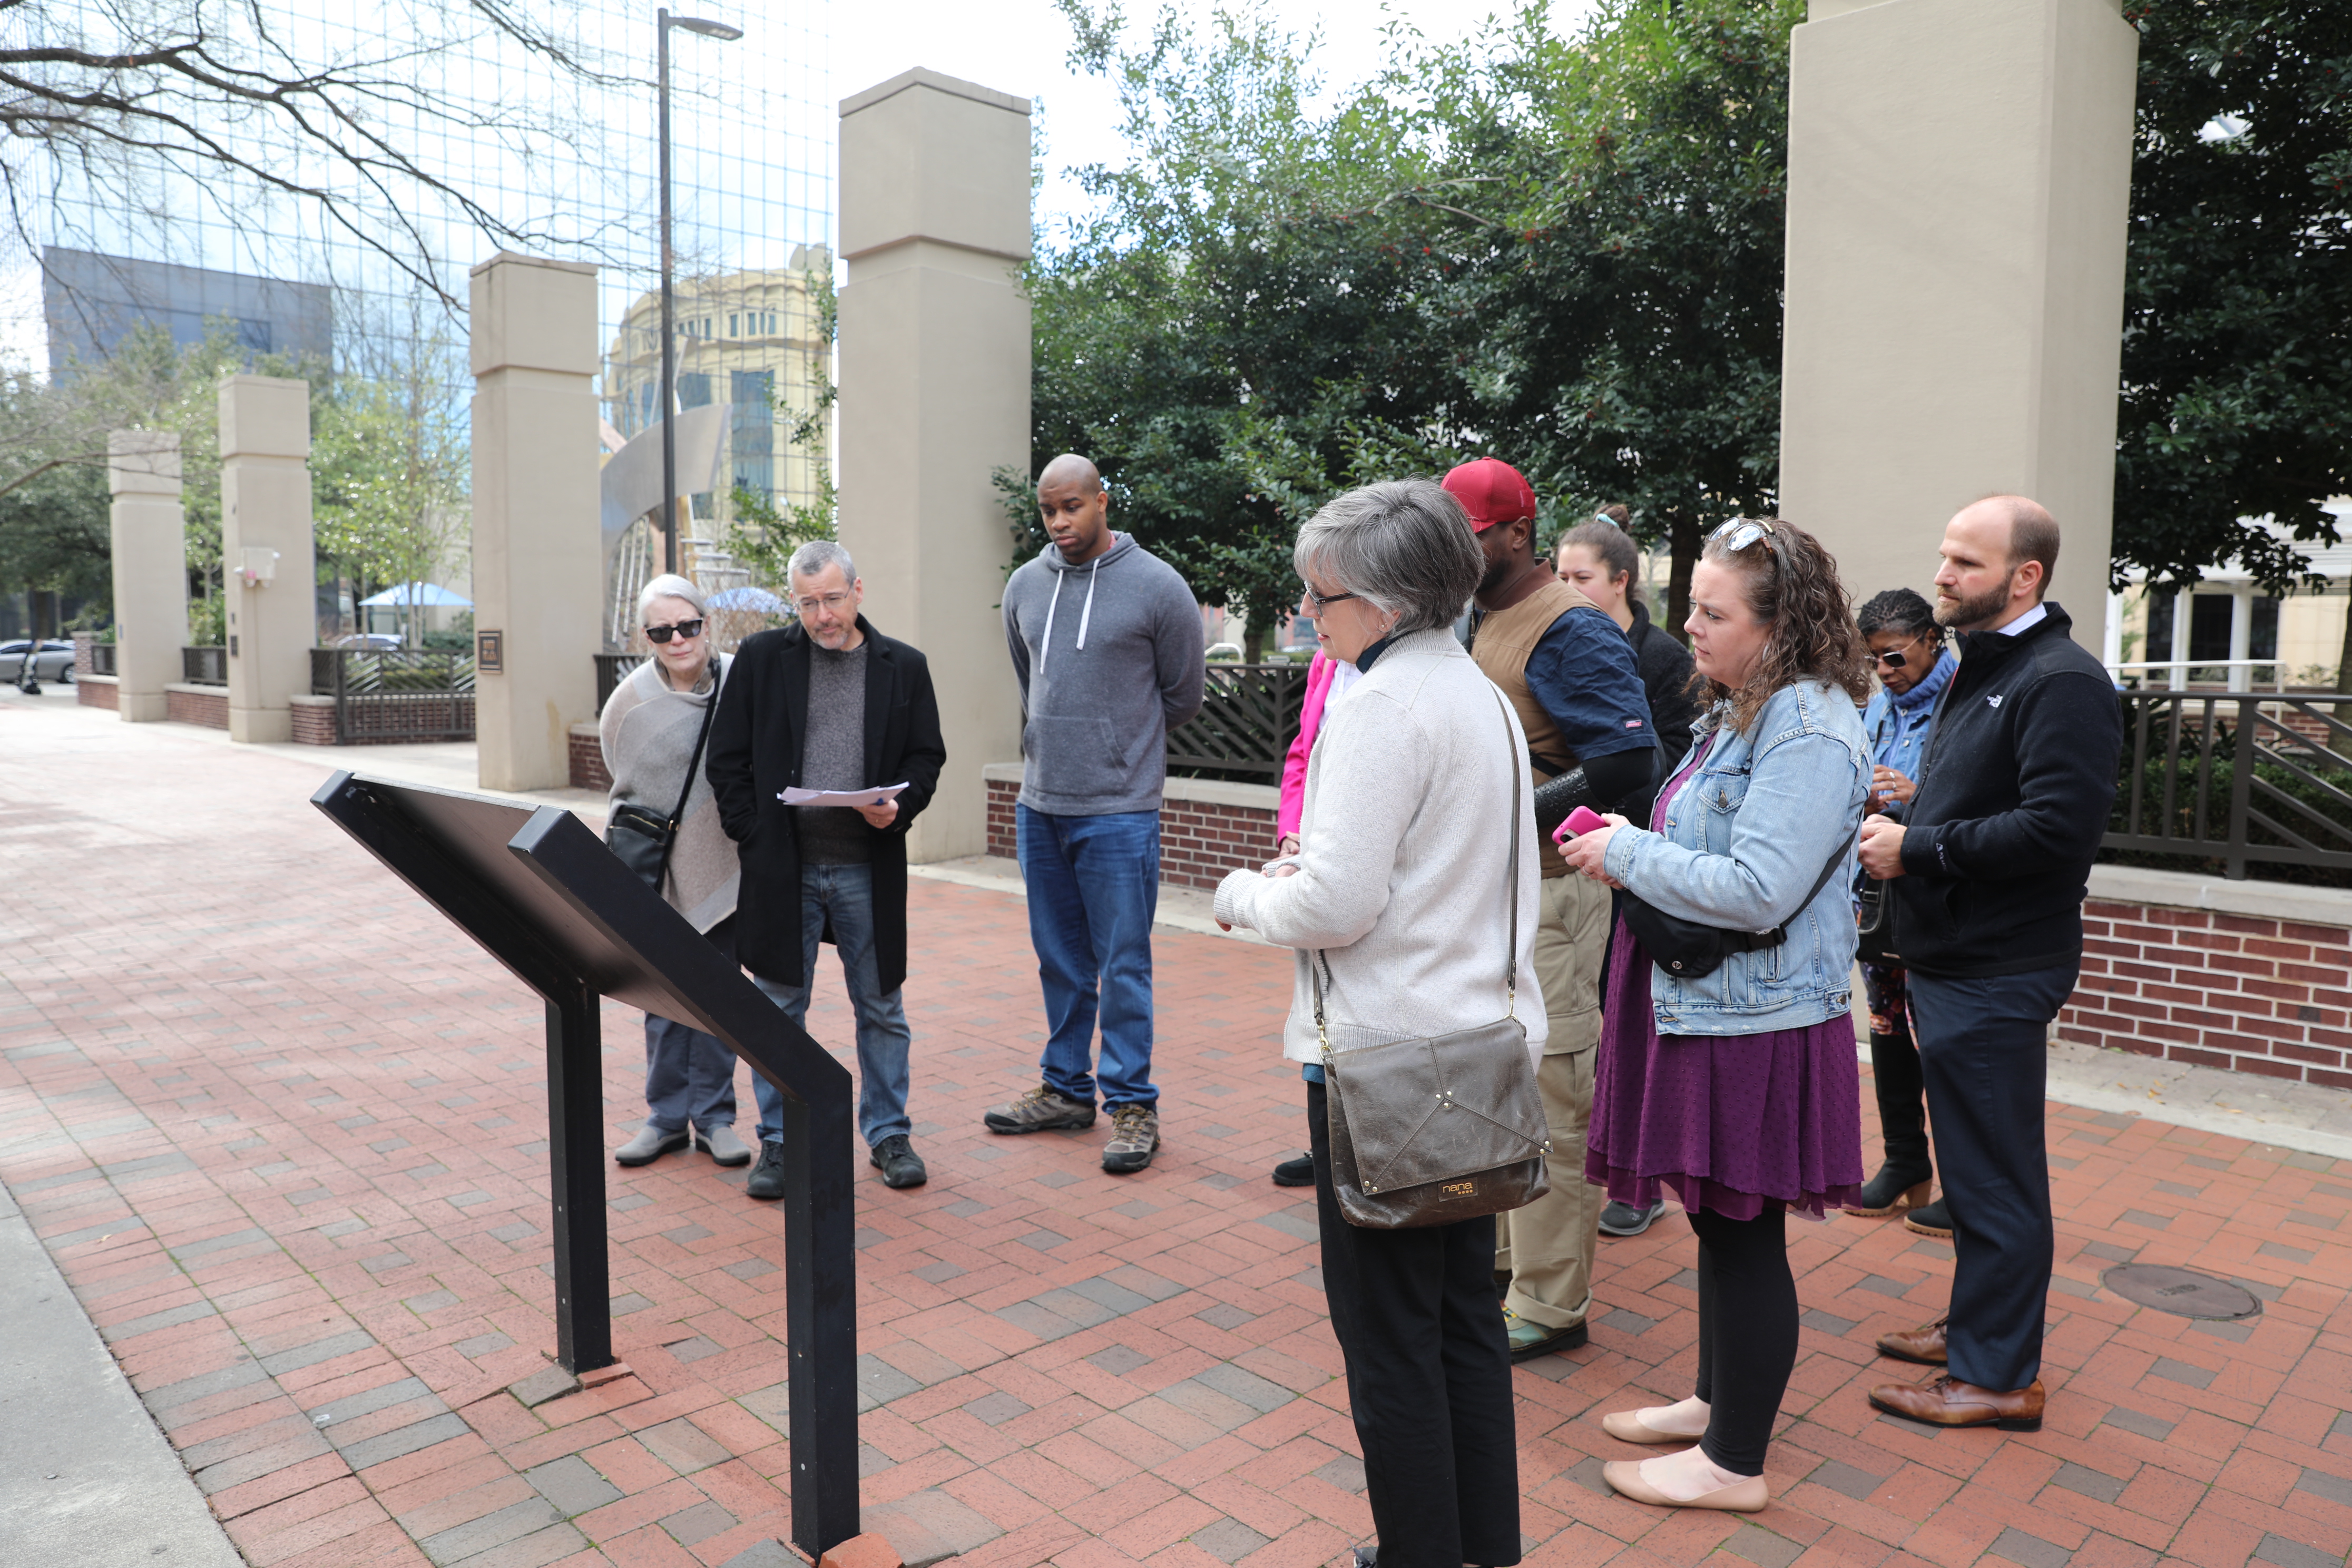 Walking tour participants read a sign along Main Street in downtown Columbia.